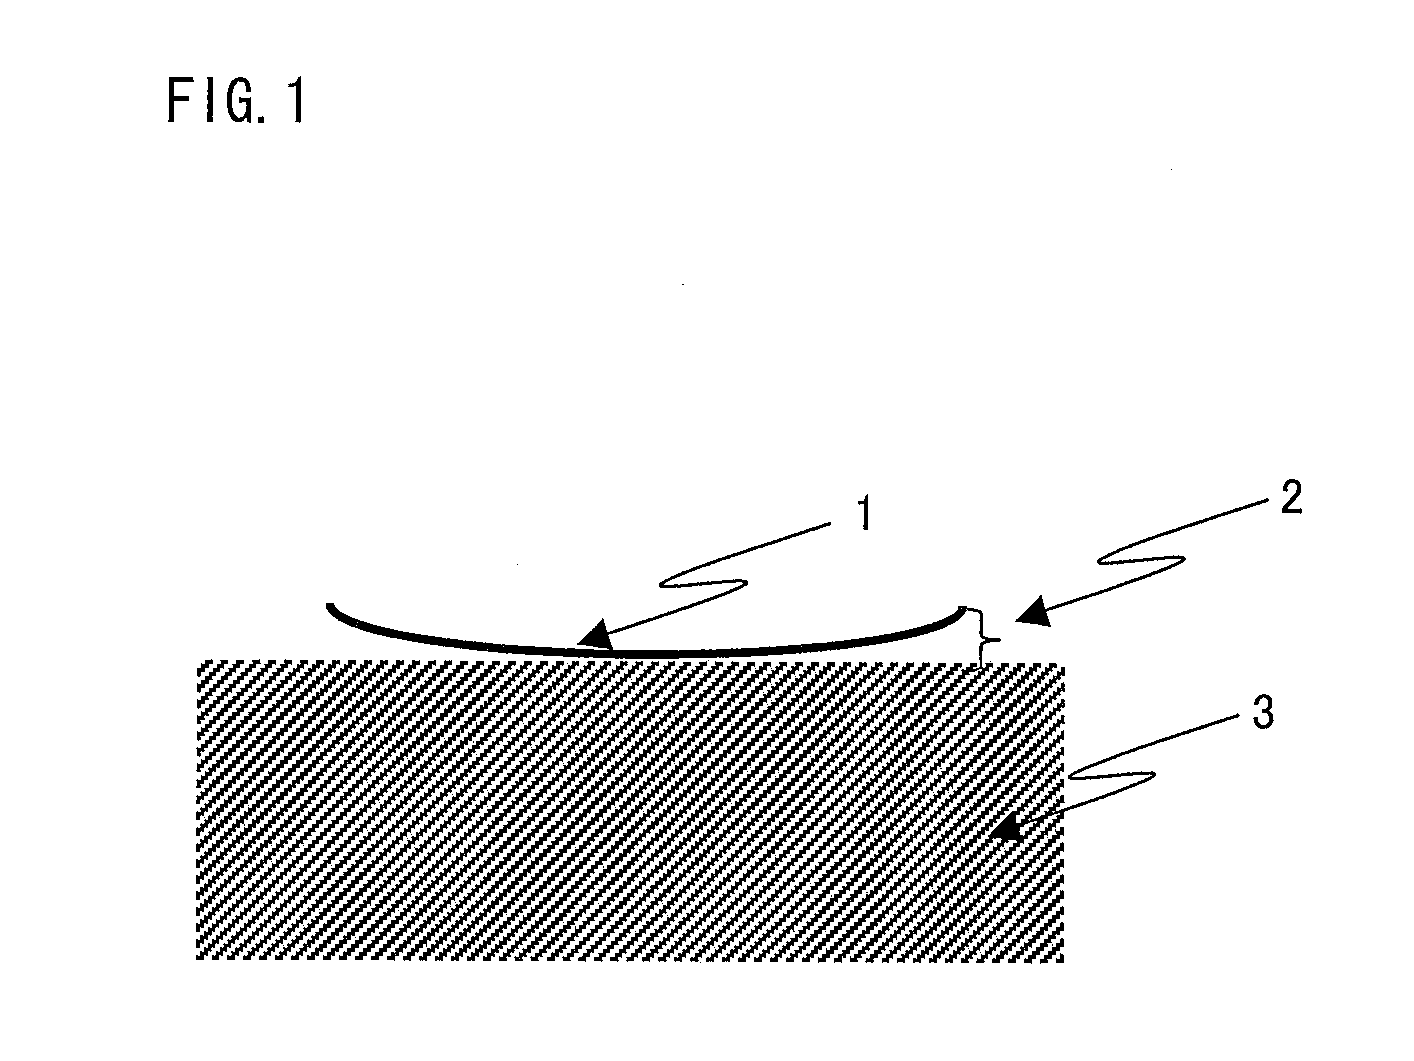 Novel resin composition for insulating film, and use thereof